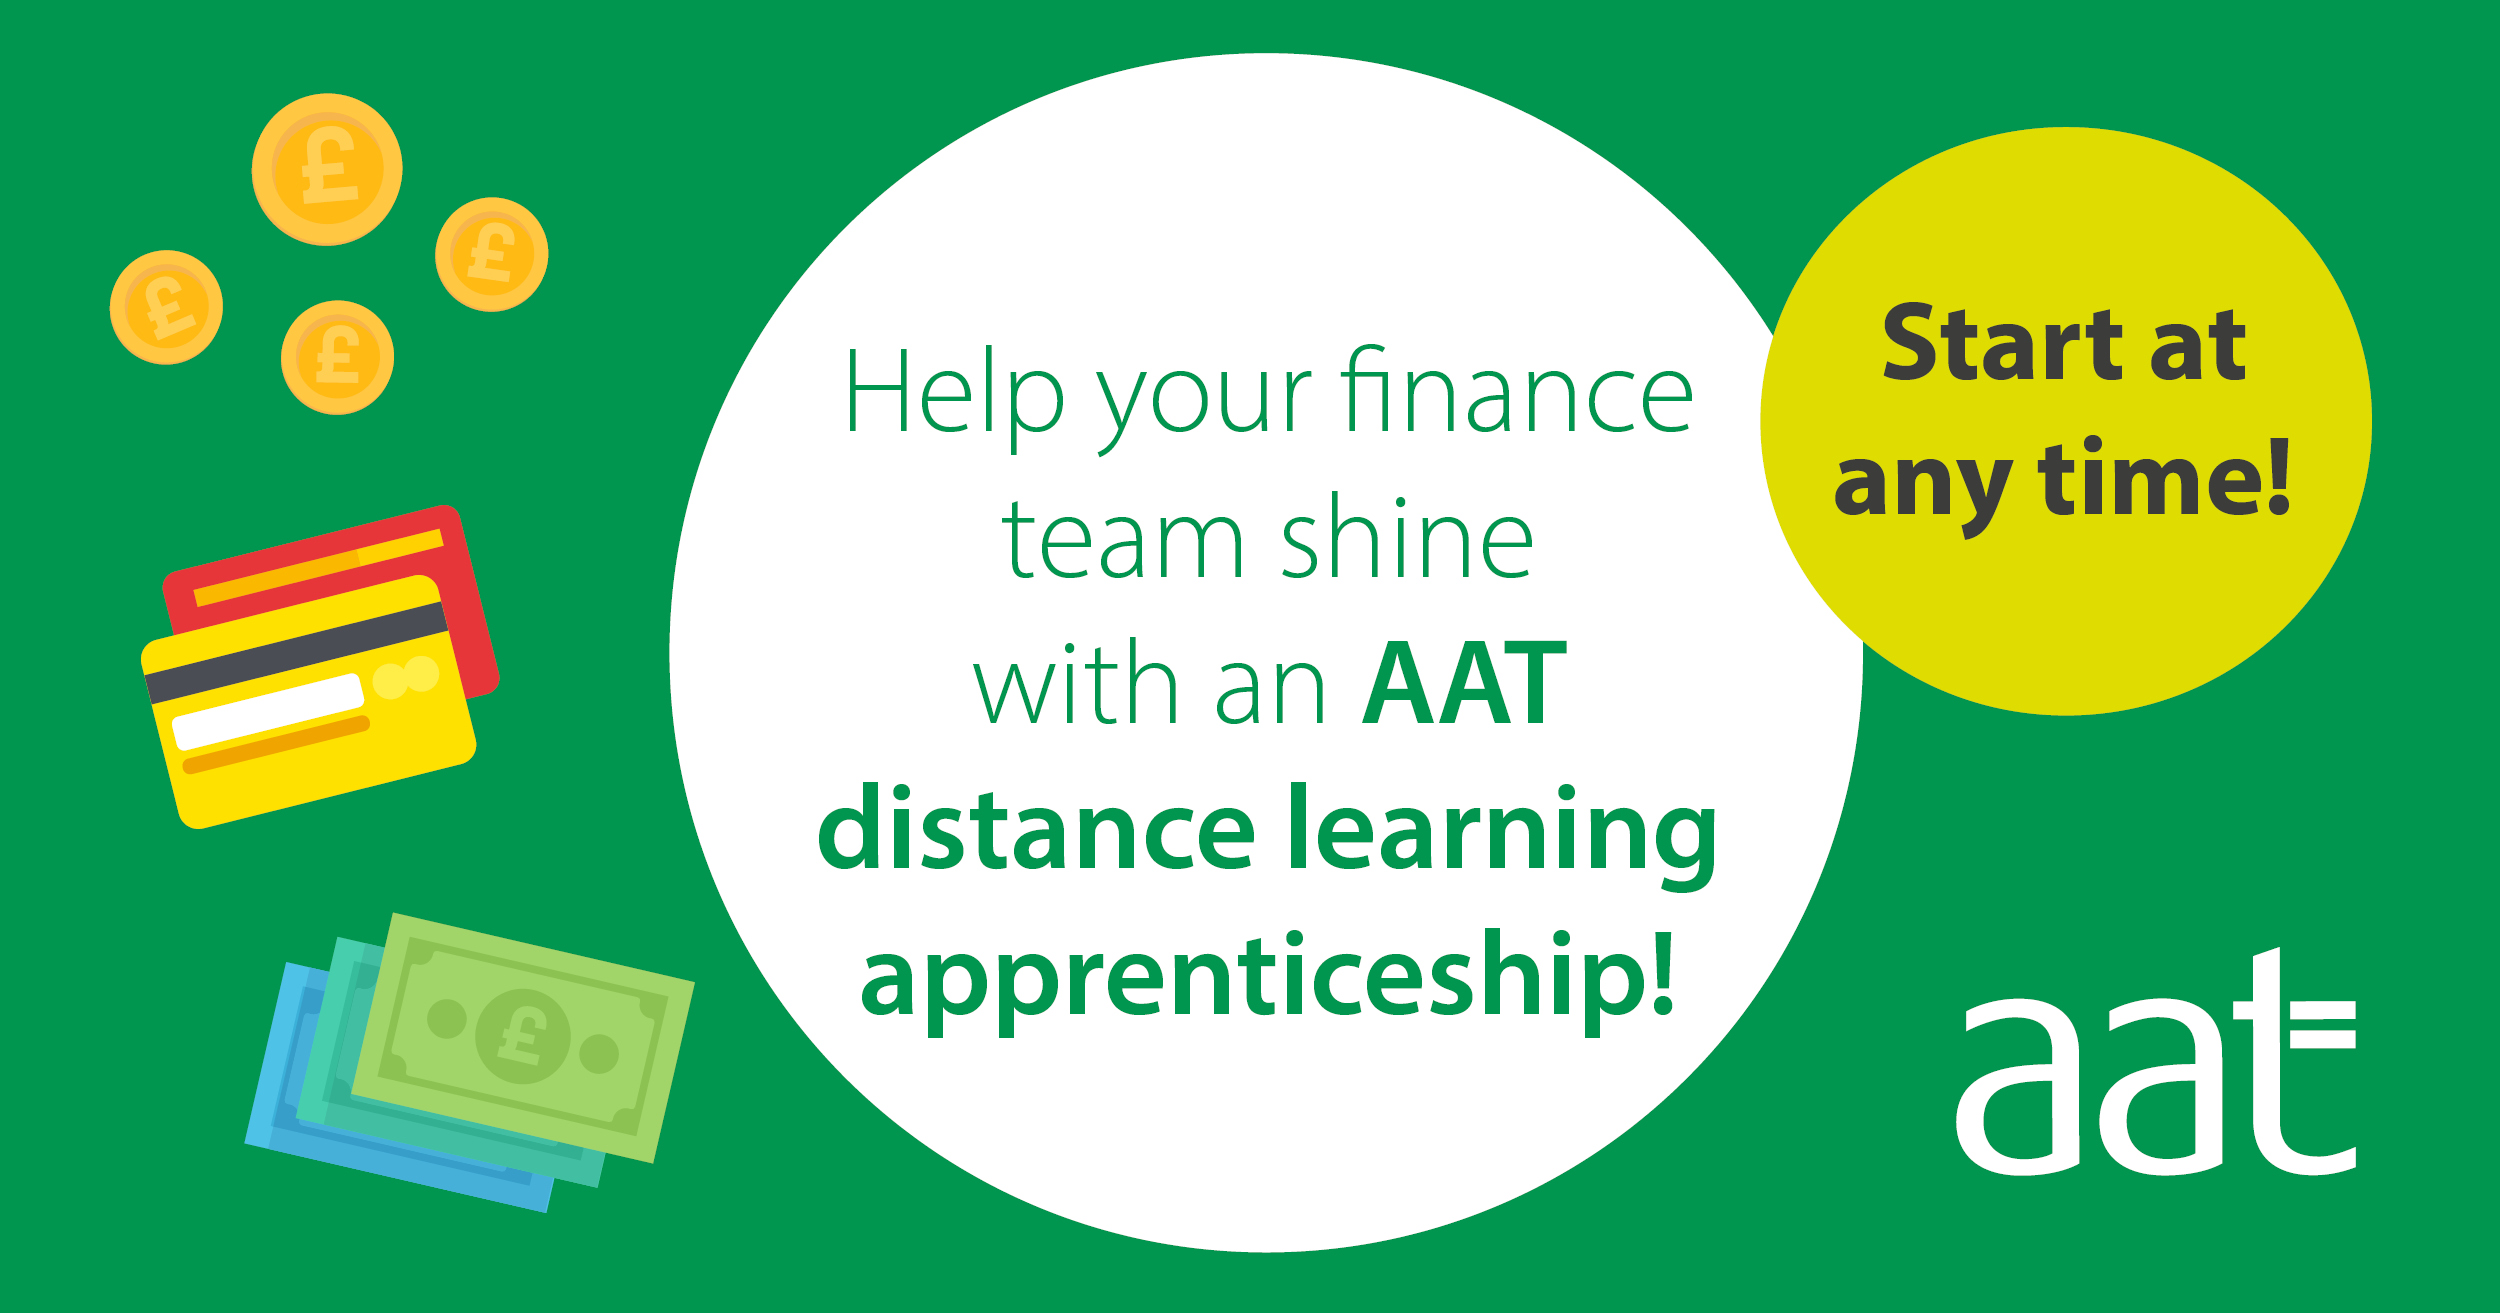 Help your finance team shine with an AAT distance learning apprenticeship!